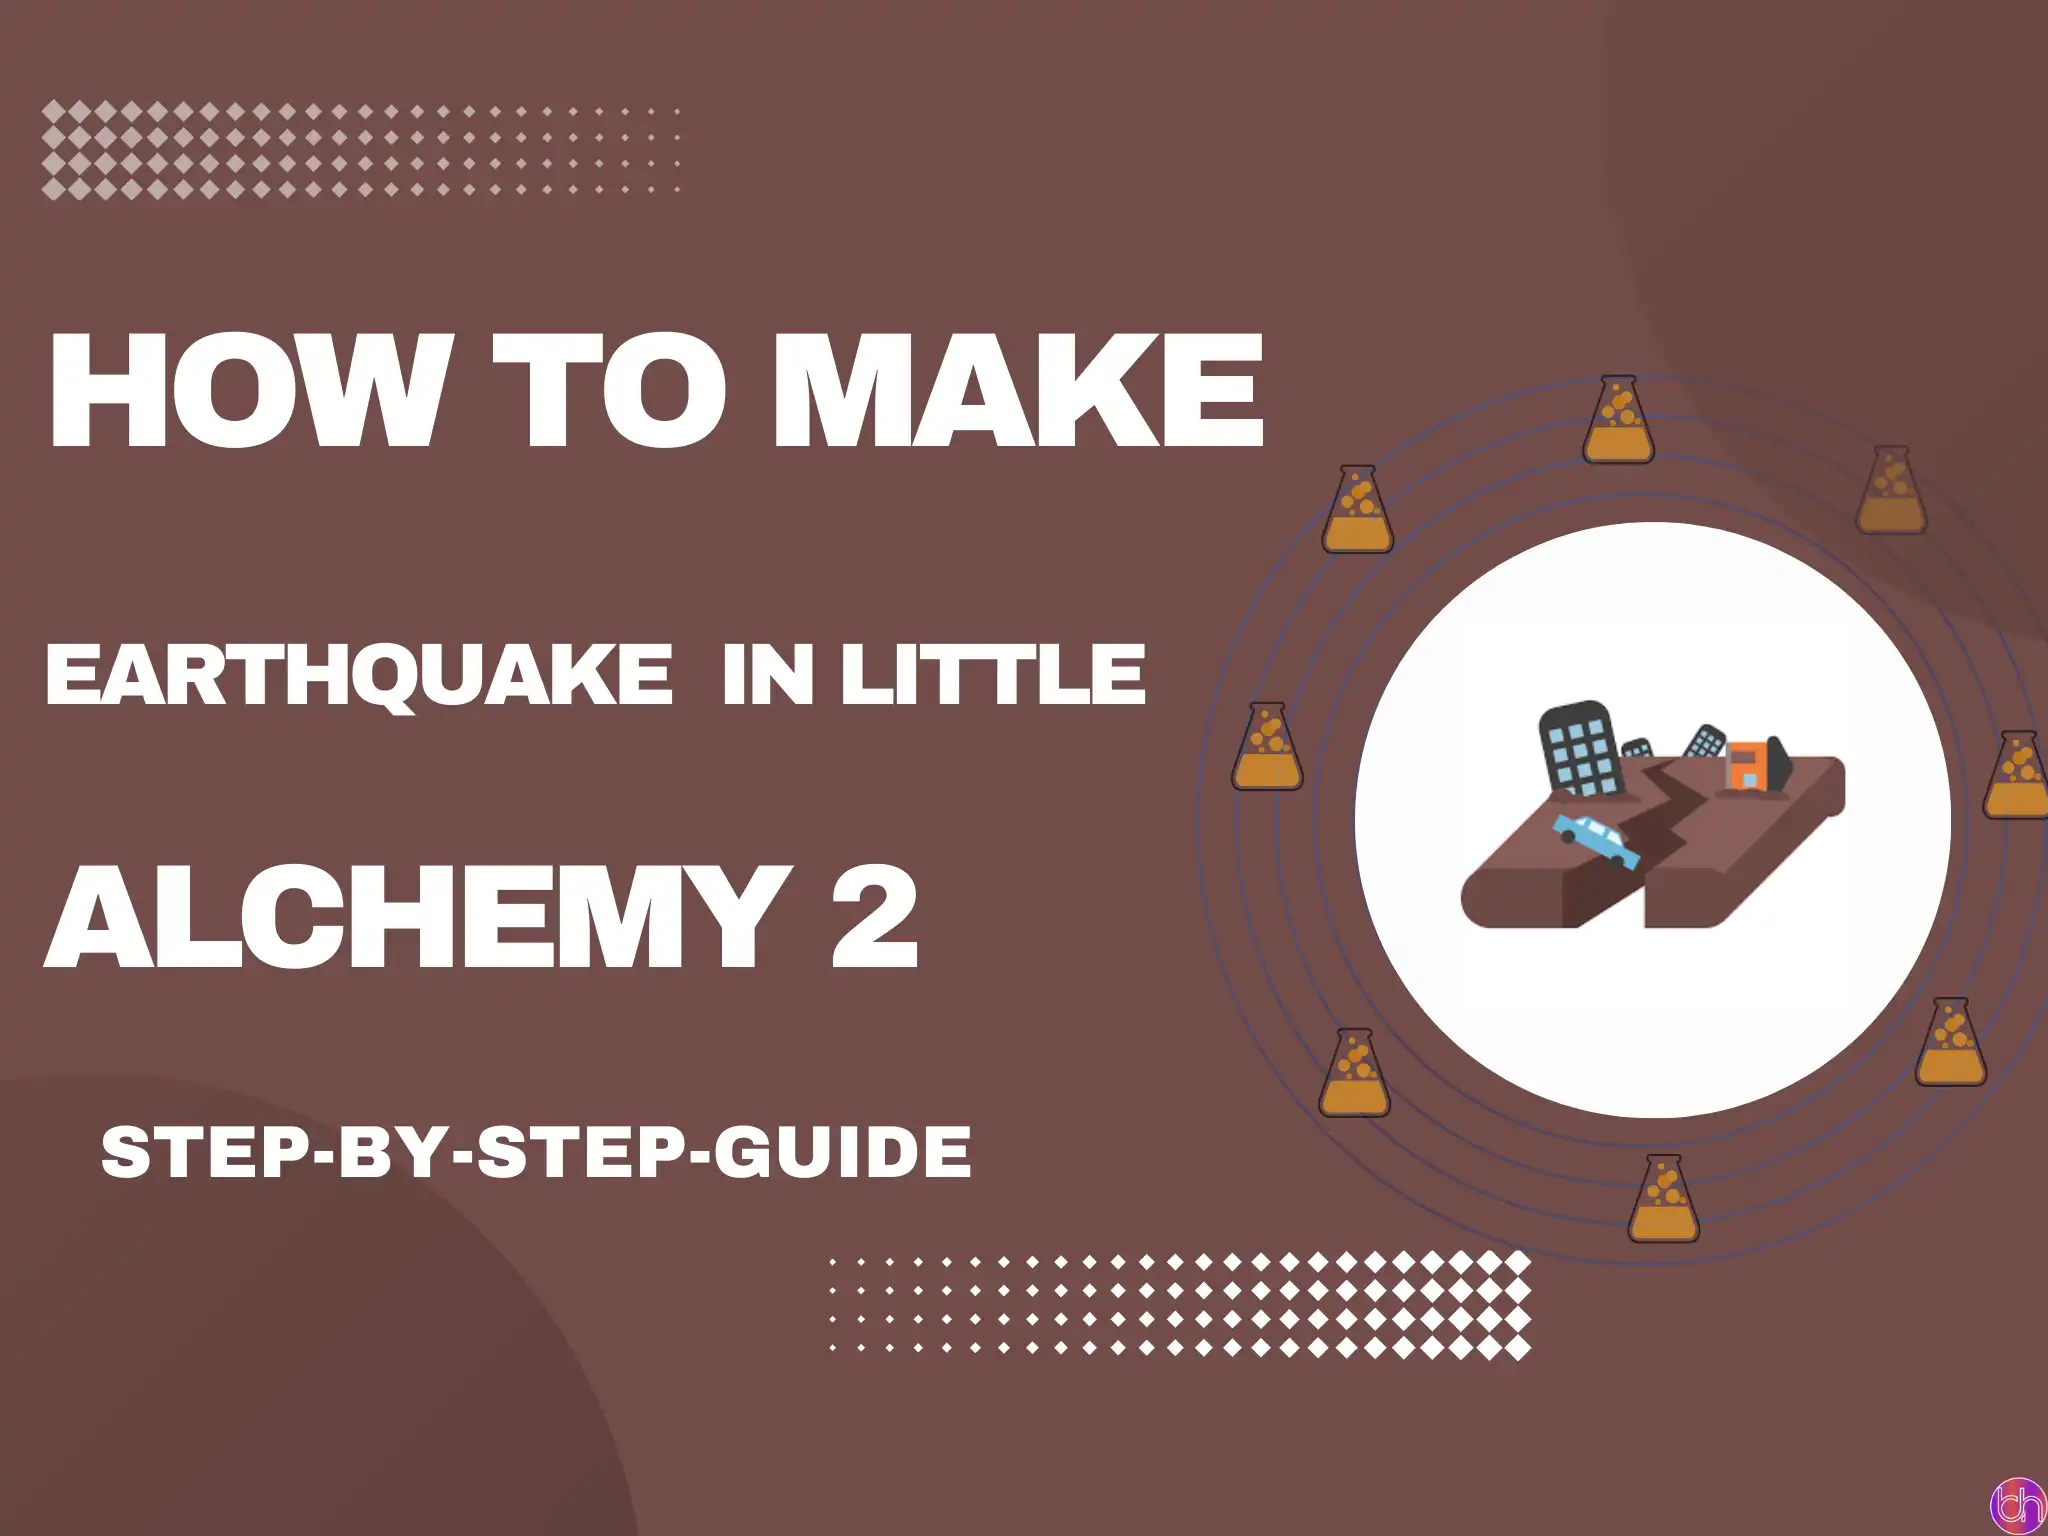 How to make Earthquake in Little Alchemy 2